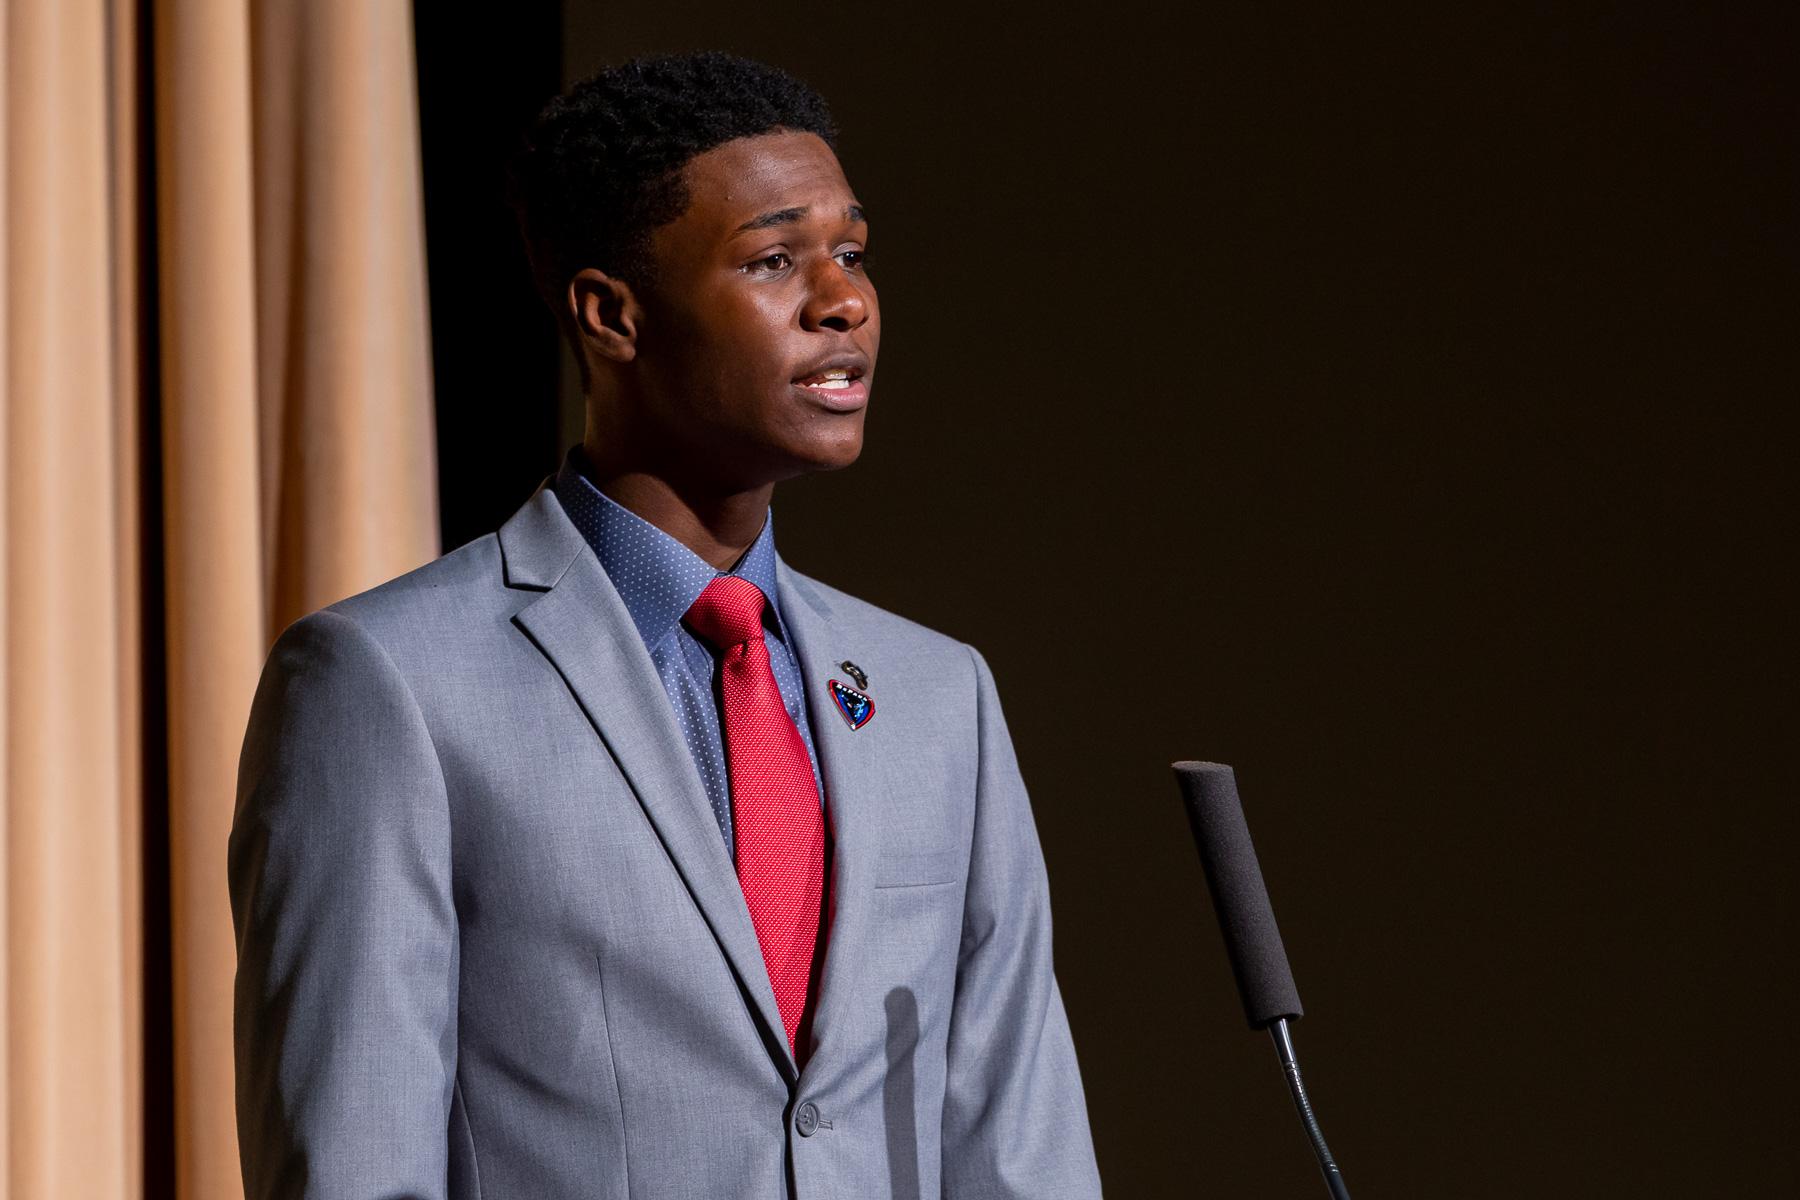 Keith Norward, sophomore, made remarks about how Dr. King’s struggle for social justice connects with DePaul’s Vincentian mission. (DePaul University/Randall Spriggs)